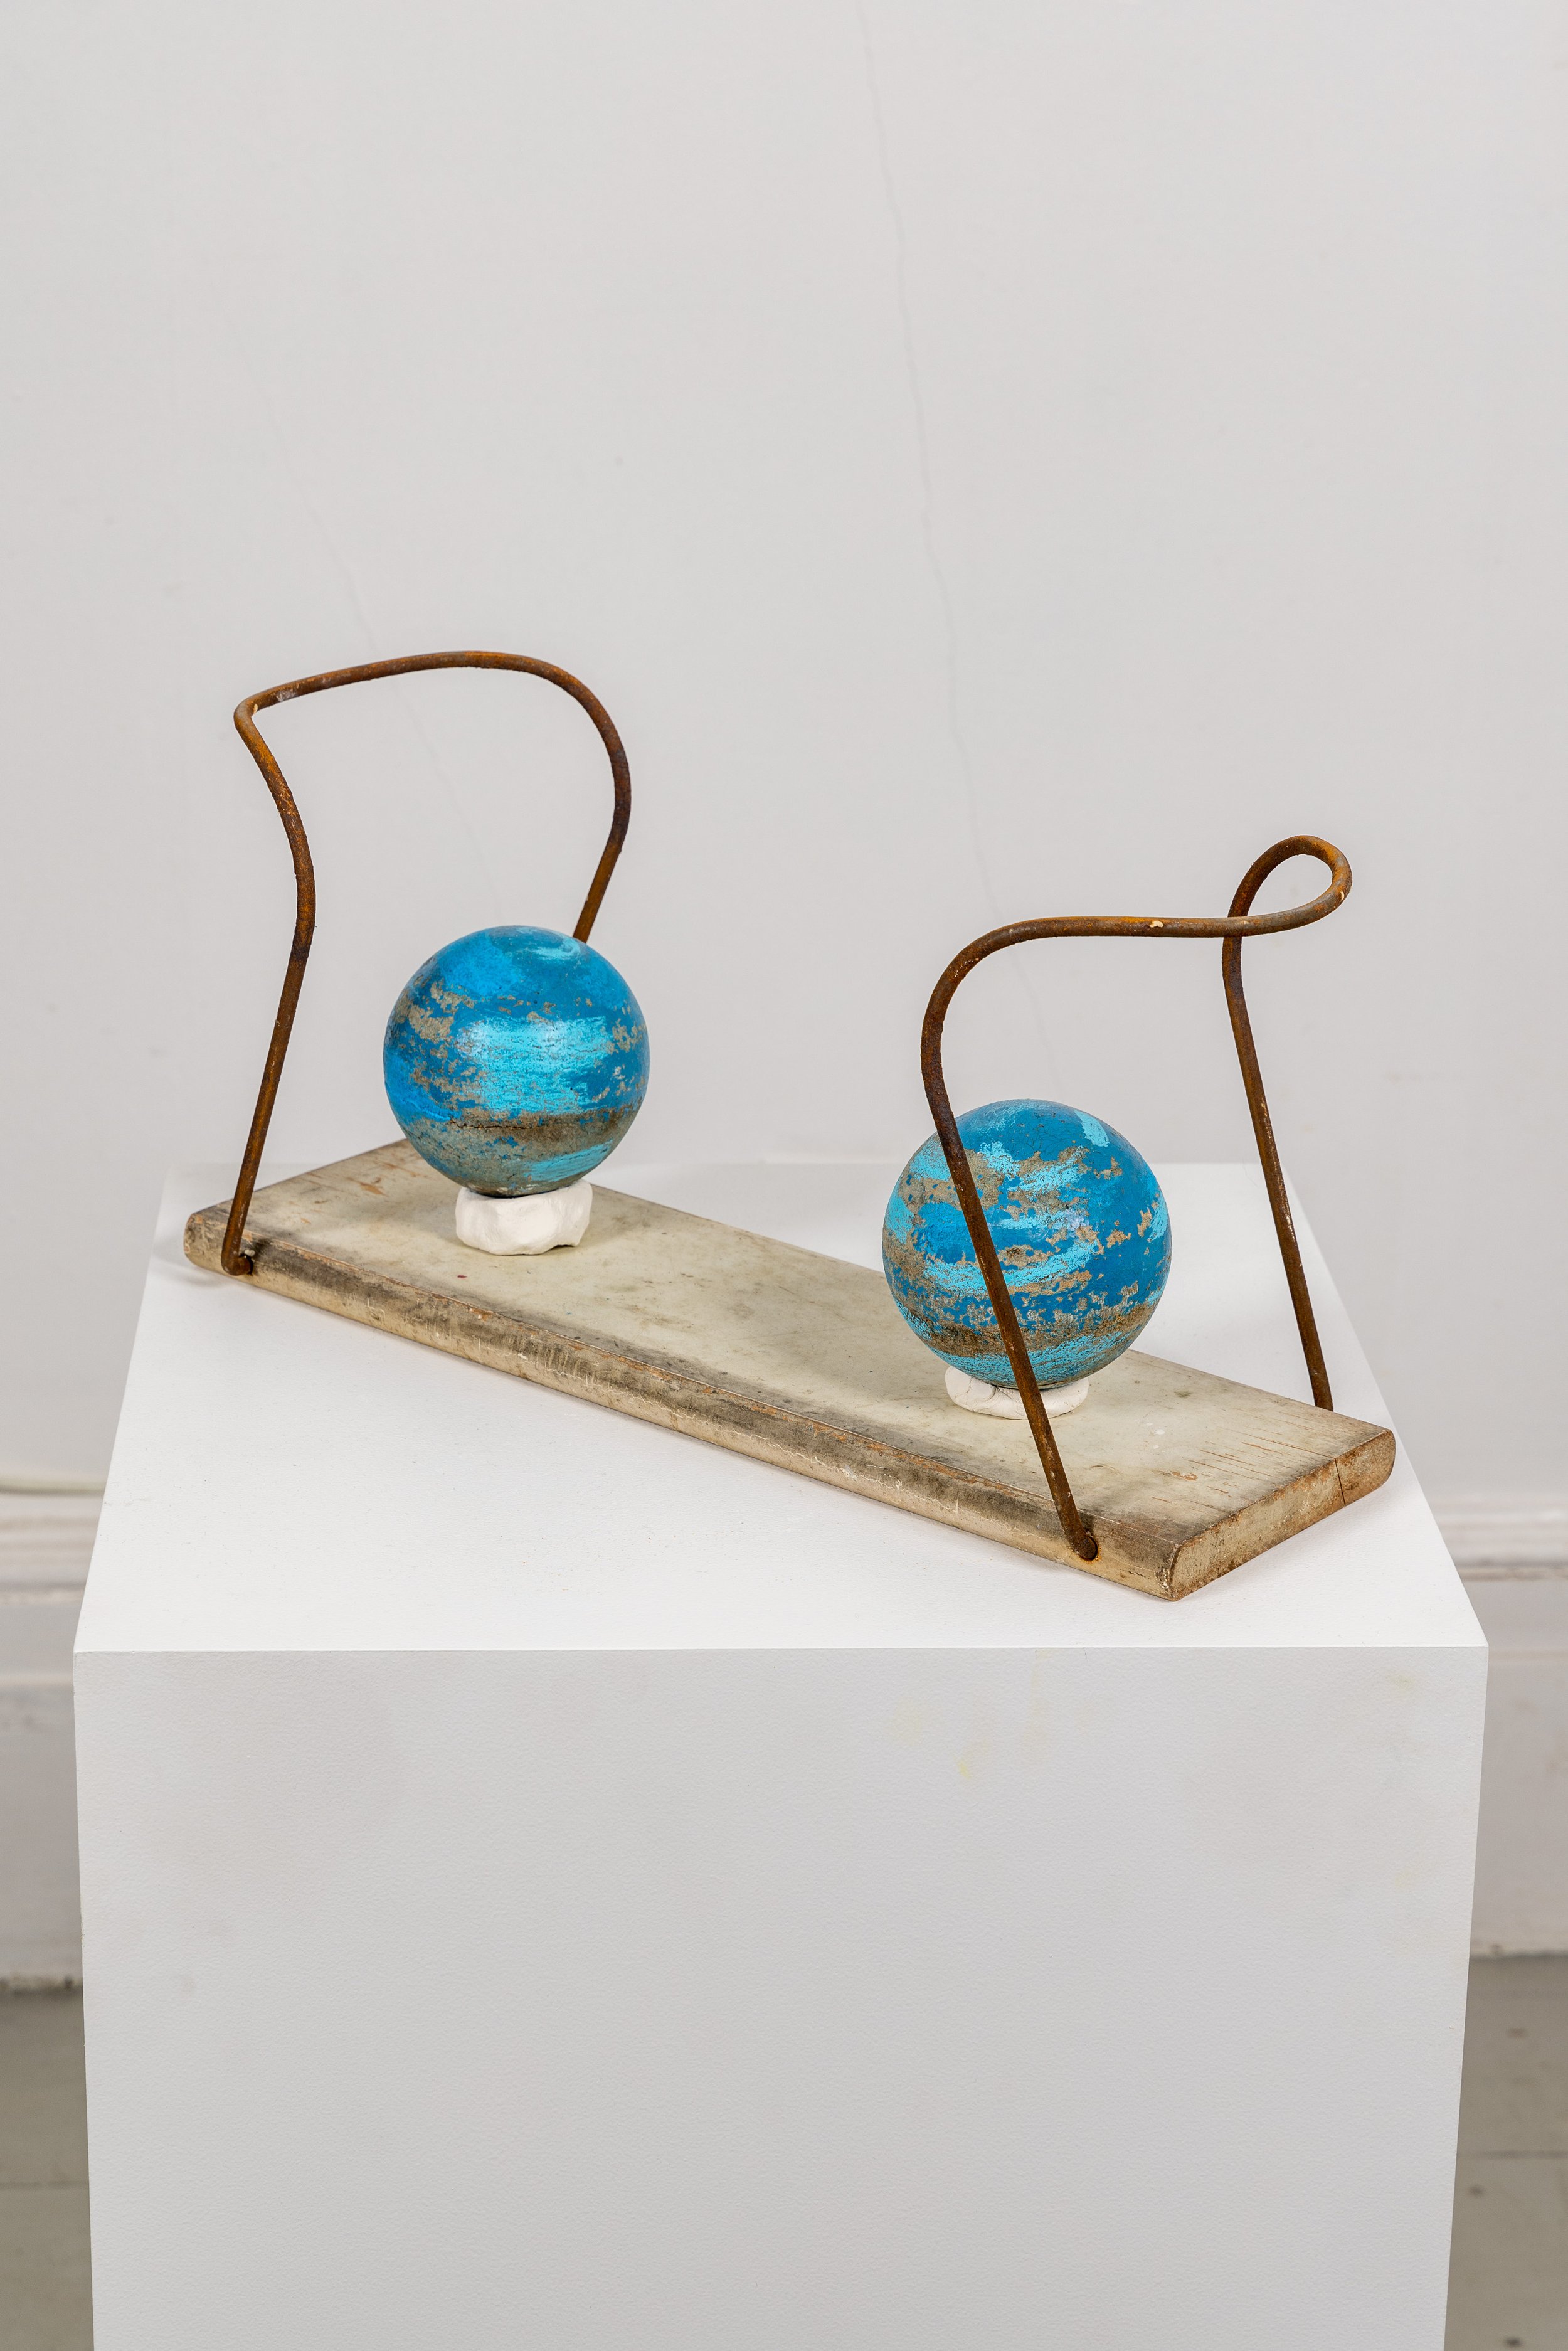 Elisa Lendvay, Sit and spin (celestial bodies apart) 2021,wood, steel rod, clay, bocce balls, latex and oil paint, 9 x 19 x 7 inches